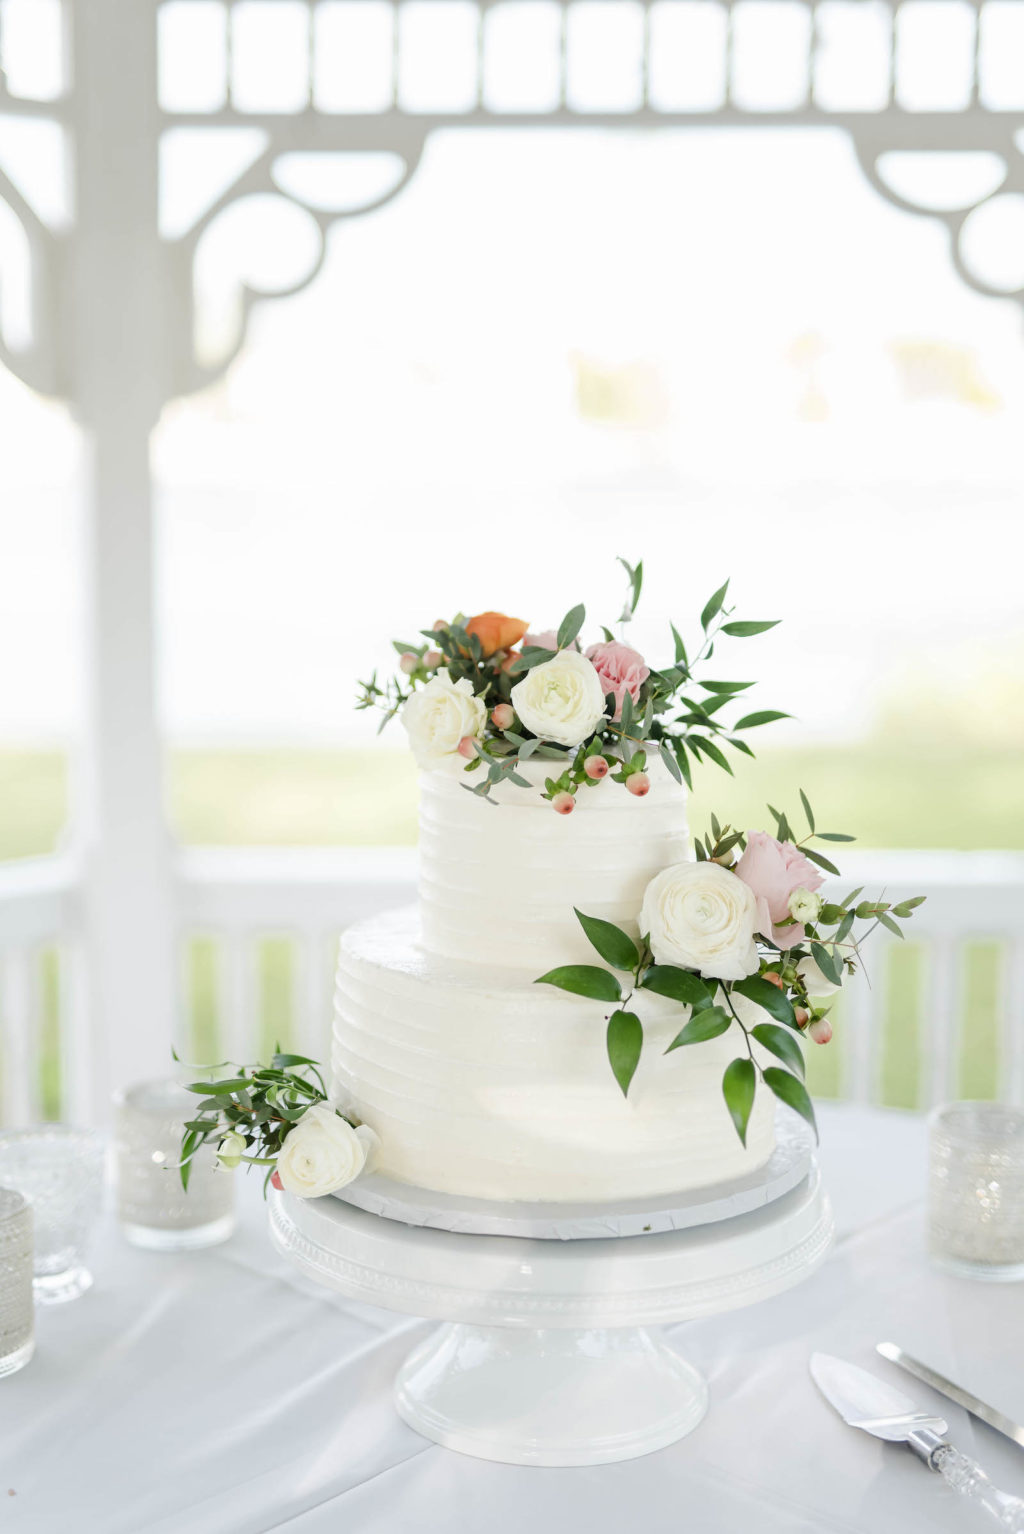 Classic Two Tier Round Wedding Cake with Pink and White Flowers with Greenery | Wedding Cake Ideas and Inspiration